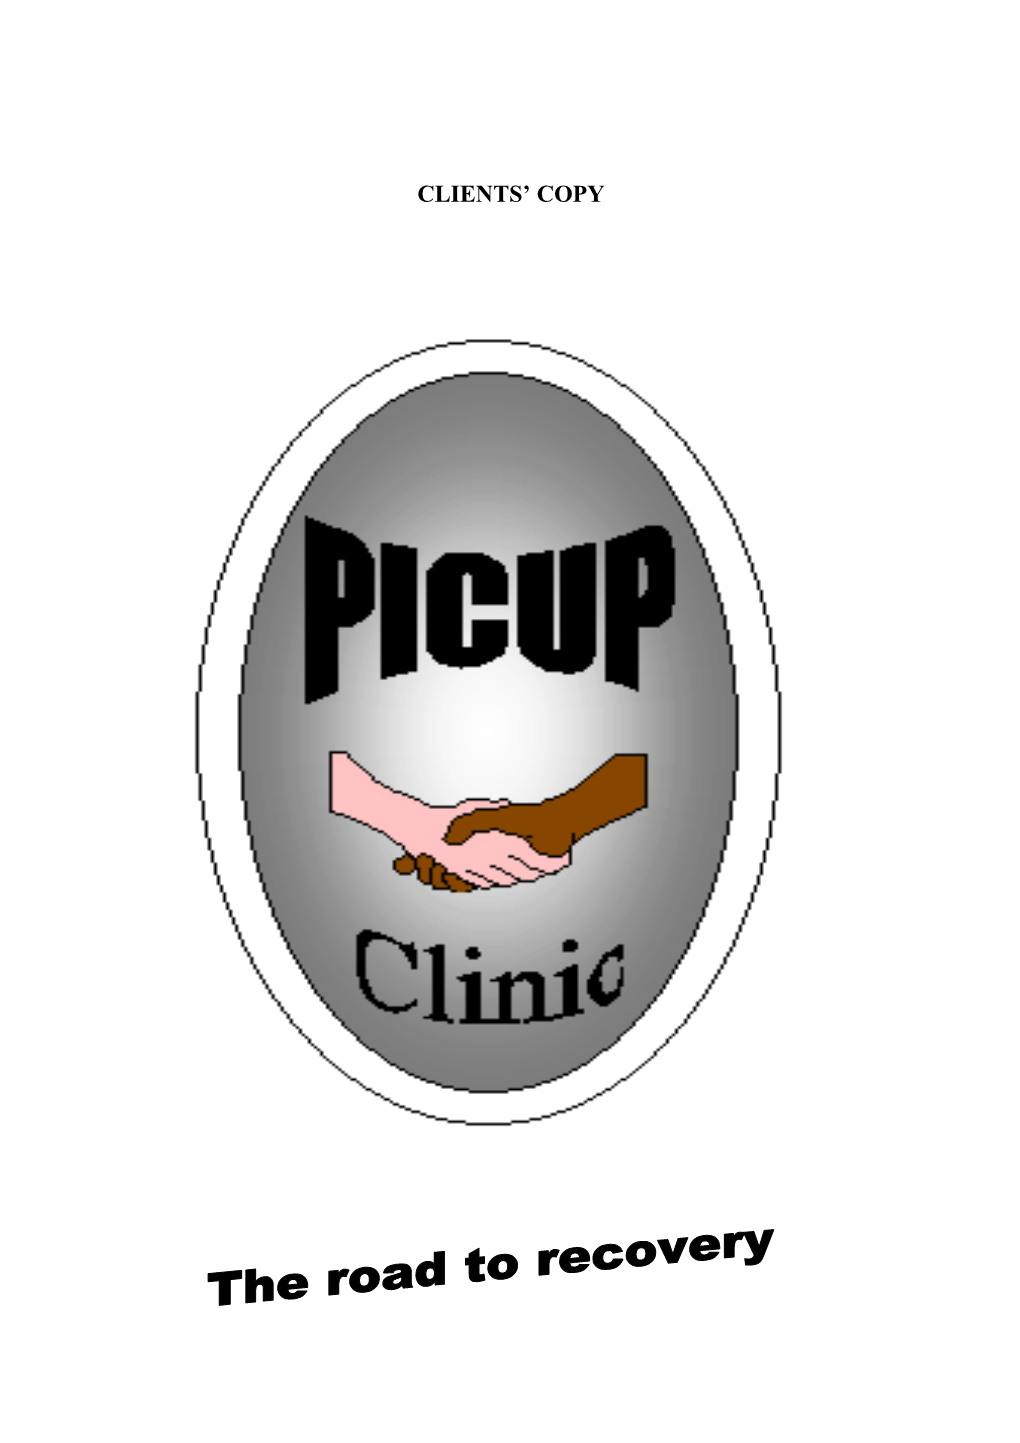 Service User at Picup